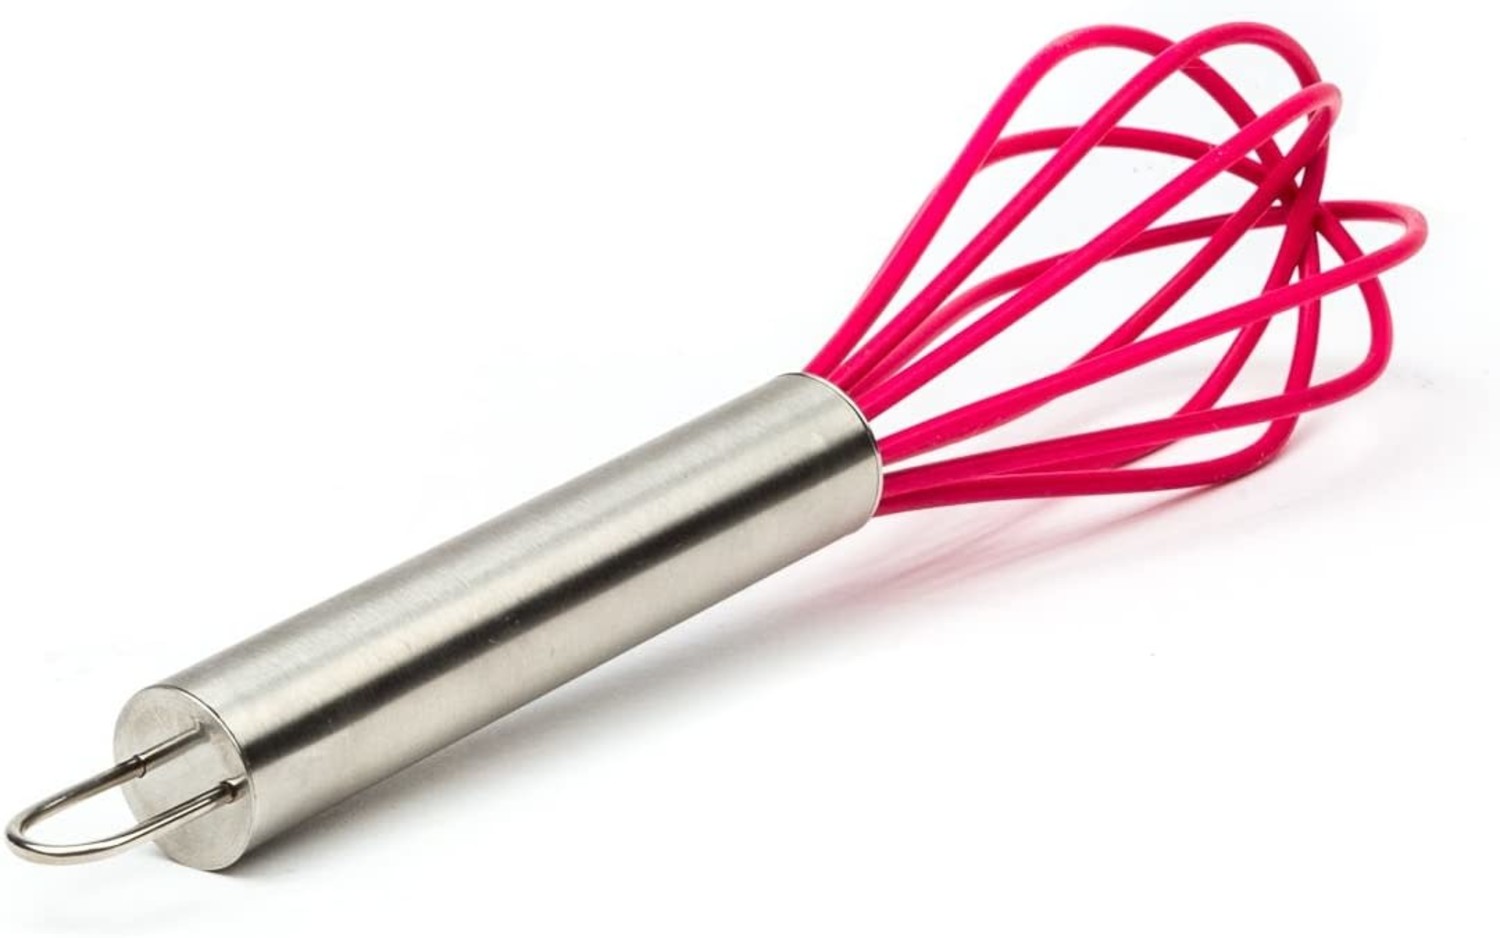 Silicone Whisk Set of 3 - Stainless Steel & Silicone Non-Stick